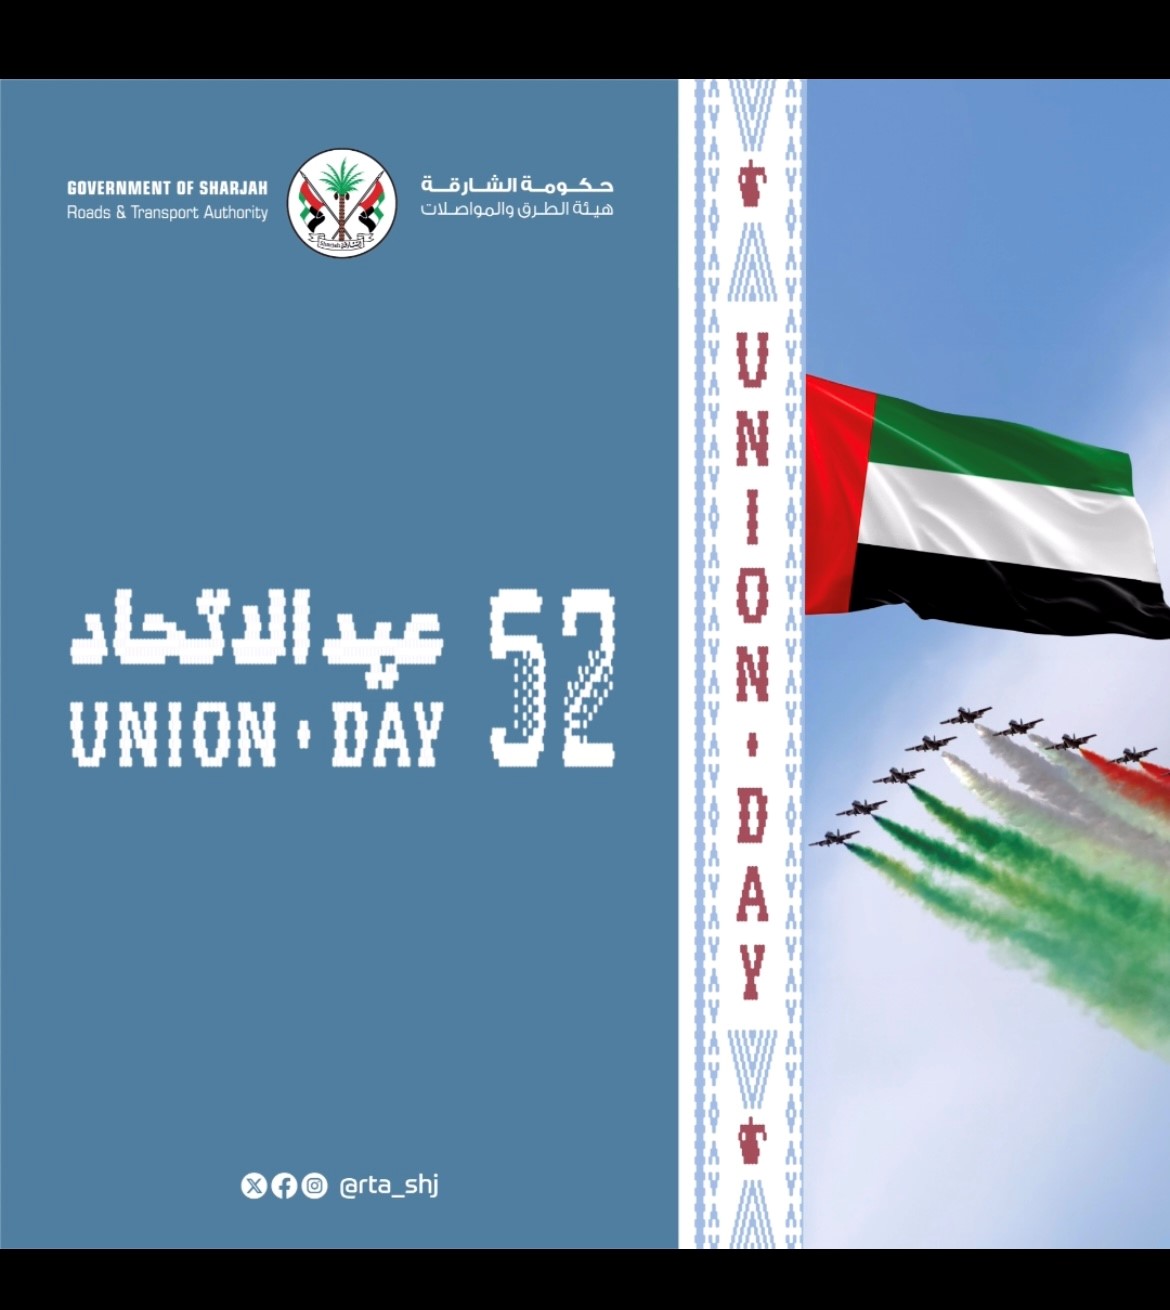 Congratulations on the 52nd National Day